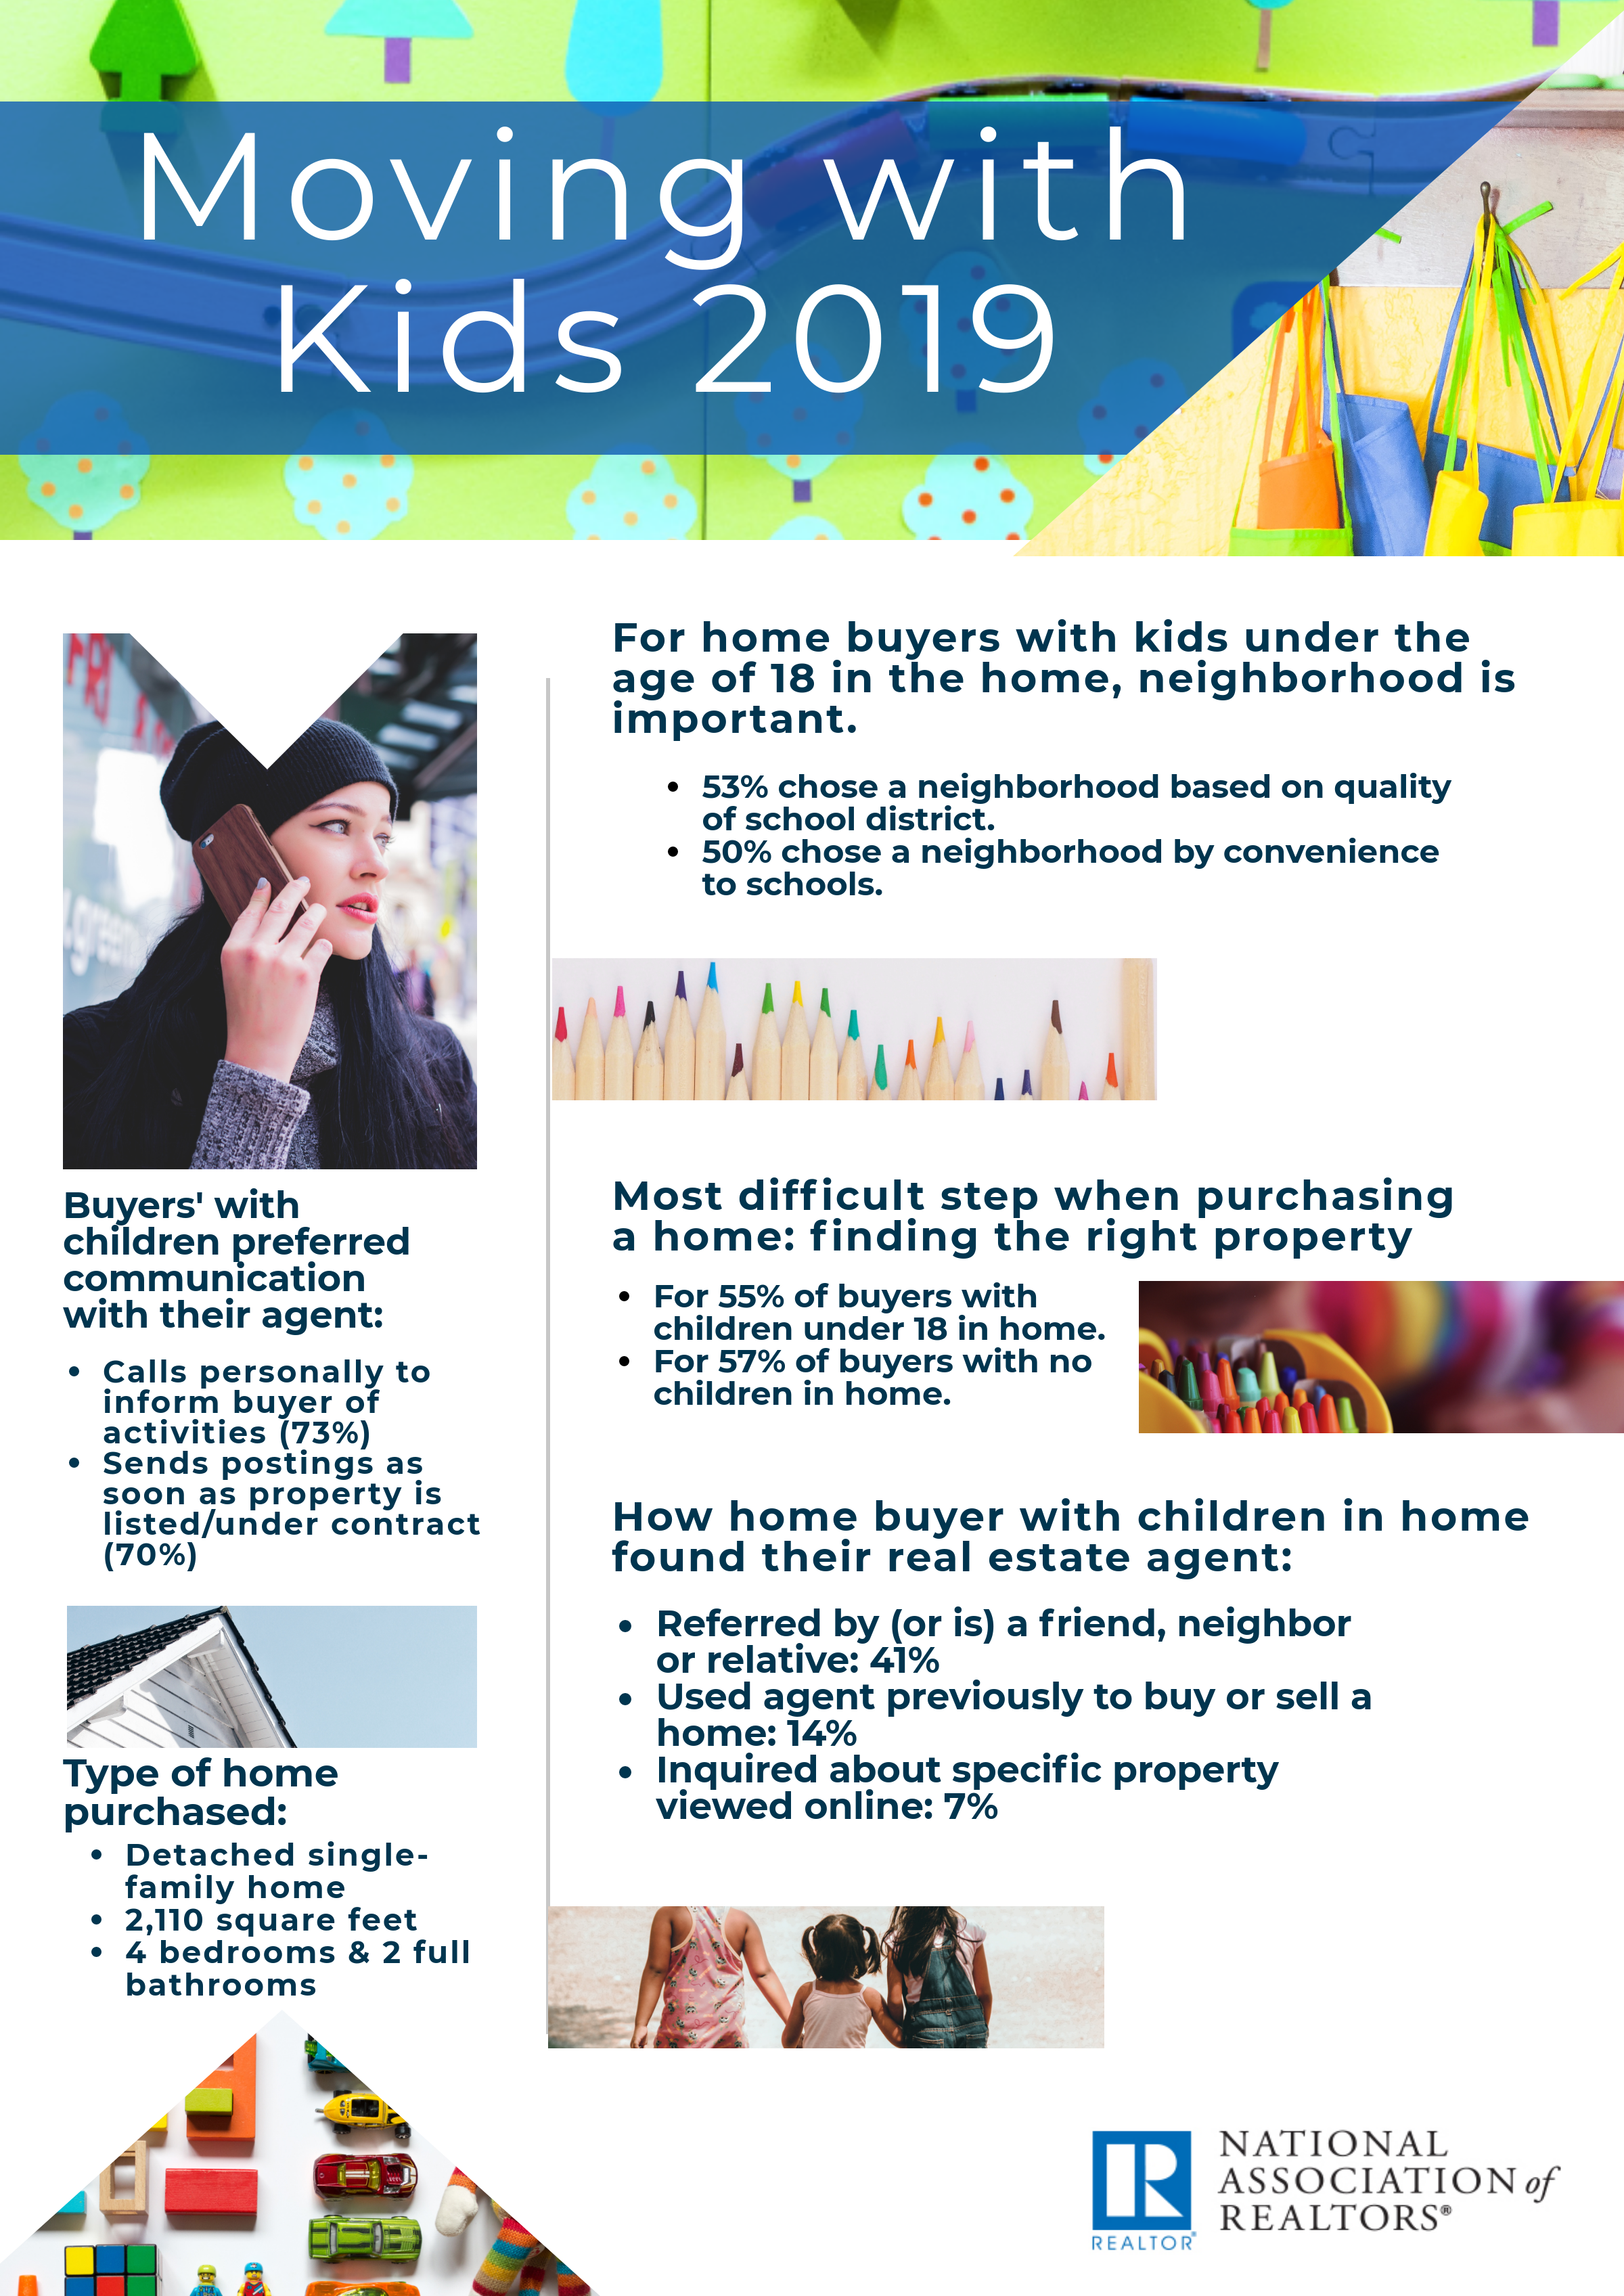 Infographic on moving with kids in 2019